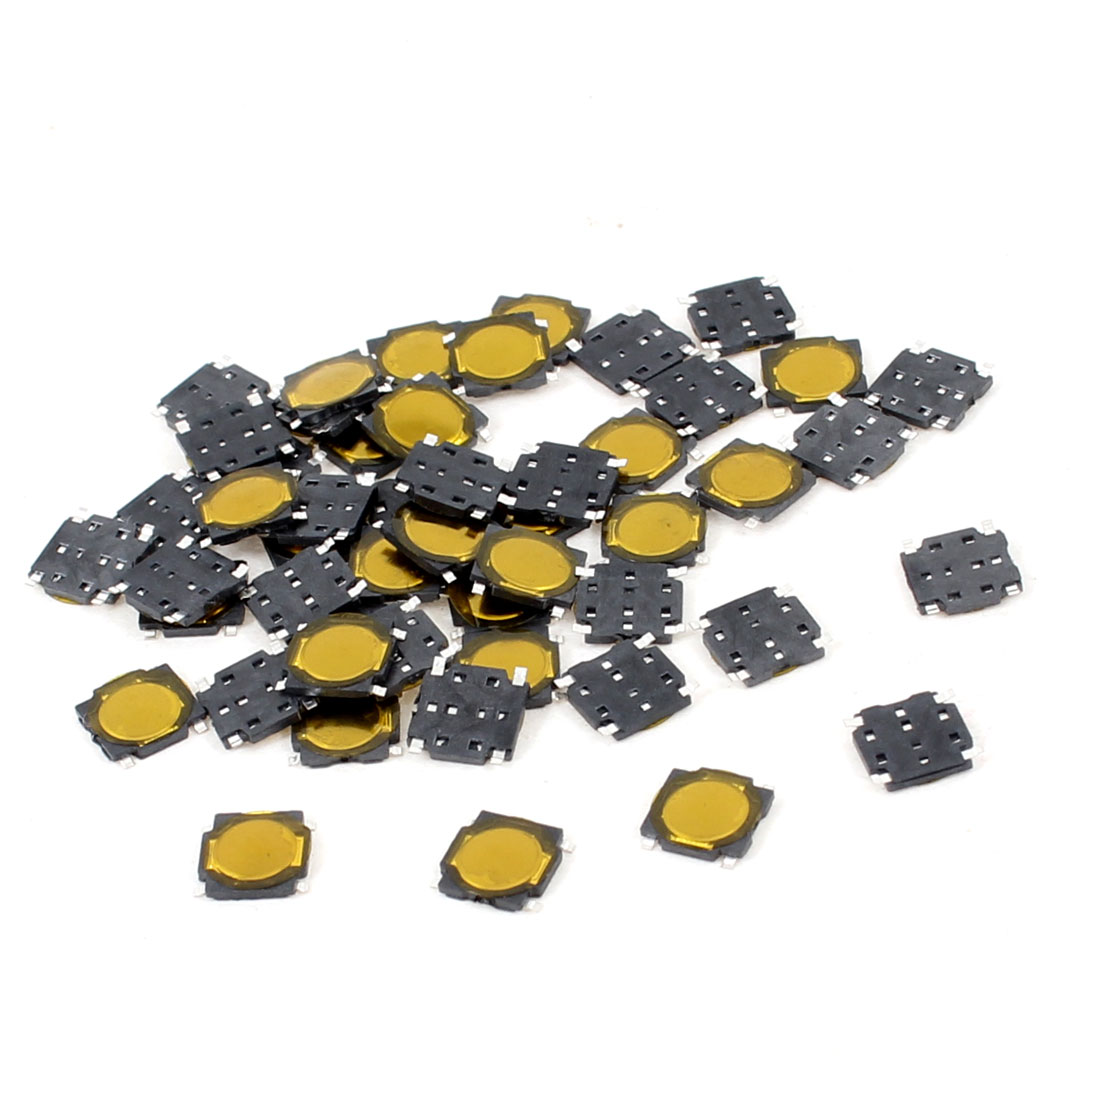 Unique Bargains 50 Pcs 4.5x4.5x0.5mm 4 Pins Momentary Push Button SMD SMT Tactile Tact Switch